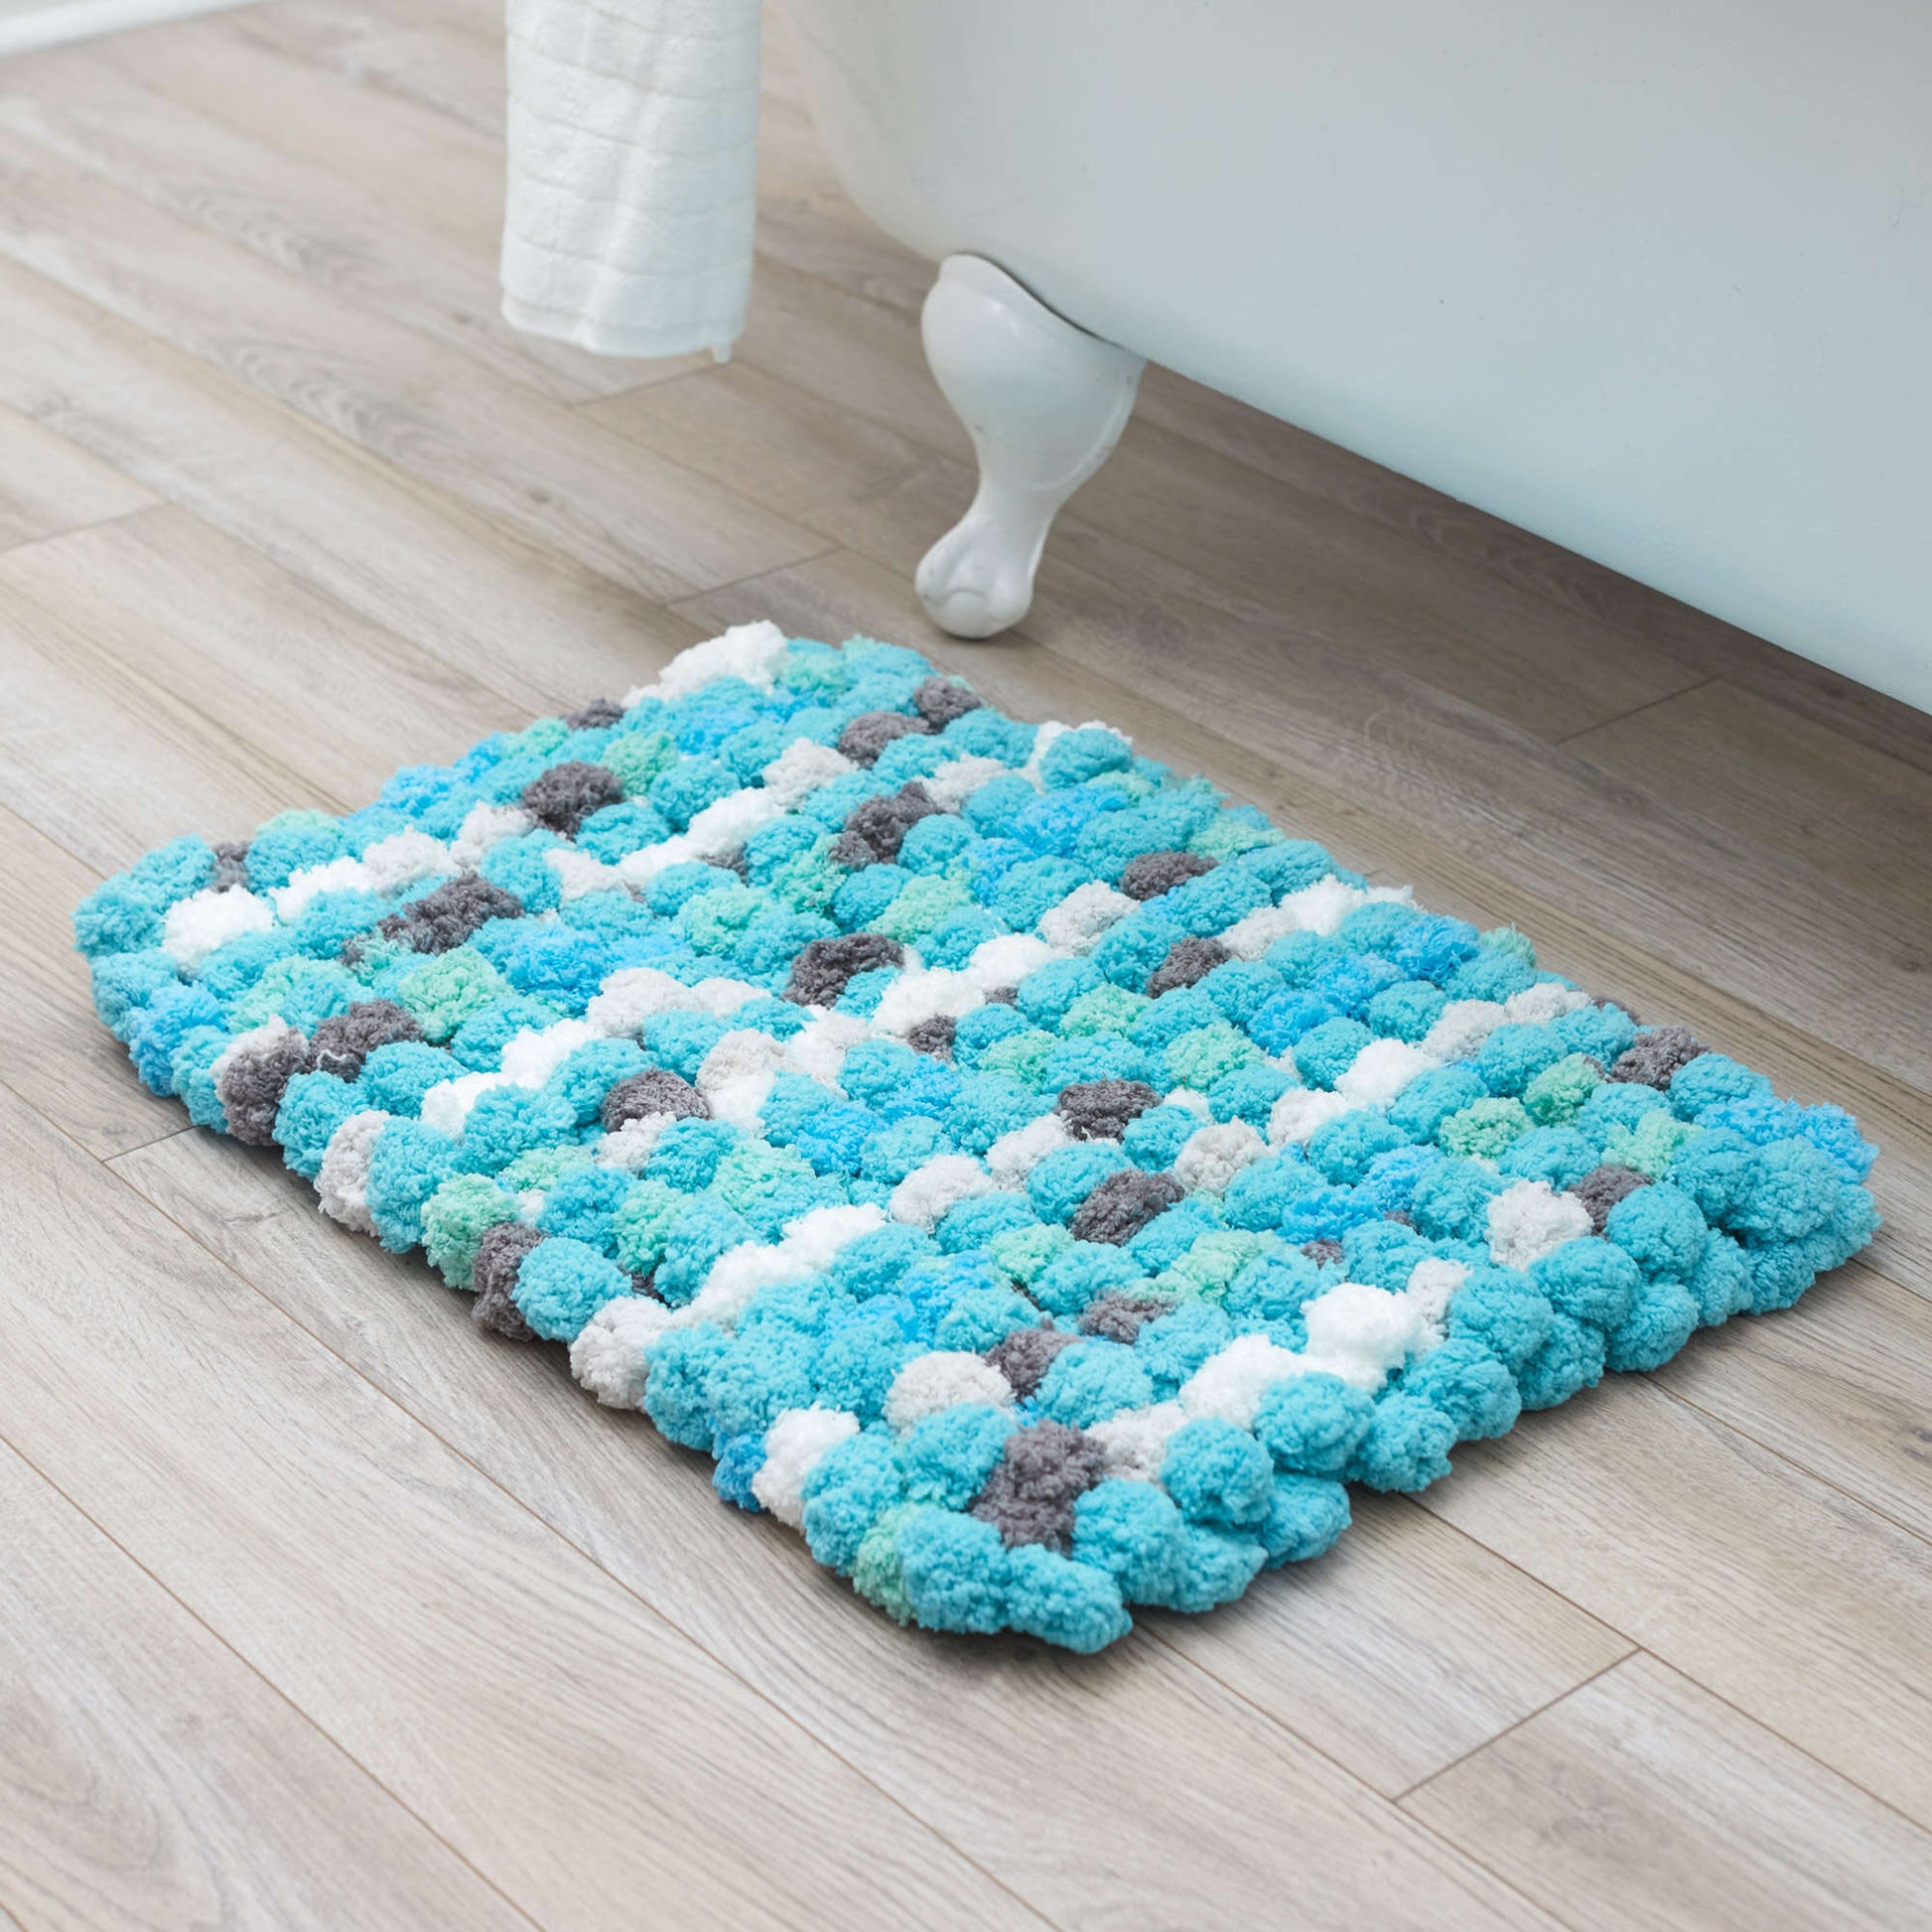 Free Red Heart Luxurious Bath Rug Knit Pattern